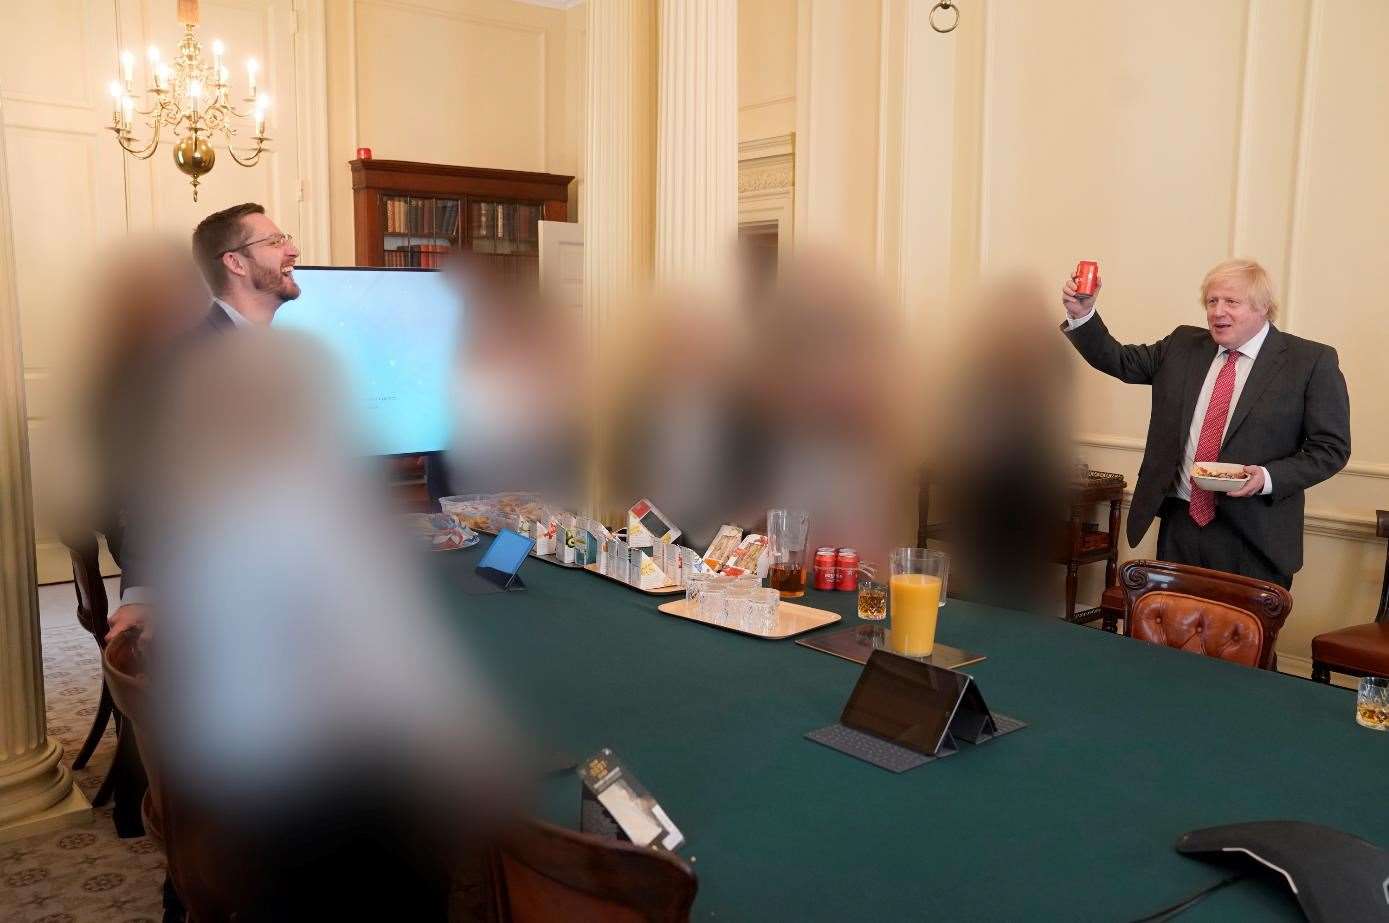 Boris Johnson at a gathering in the Cabinet Room to celebrate his 56th birthday (Sue Gray Report/Cabinet Office/PA)